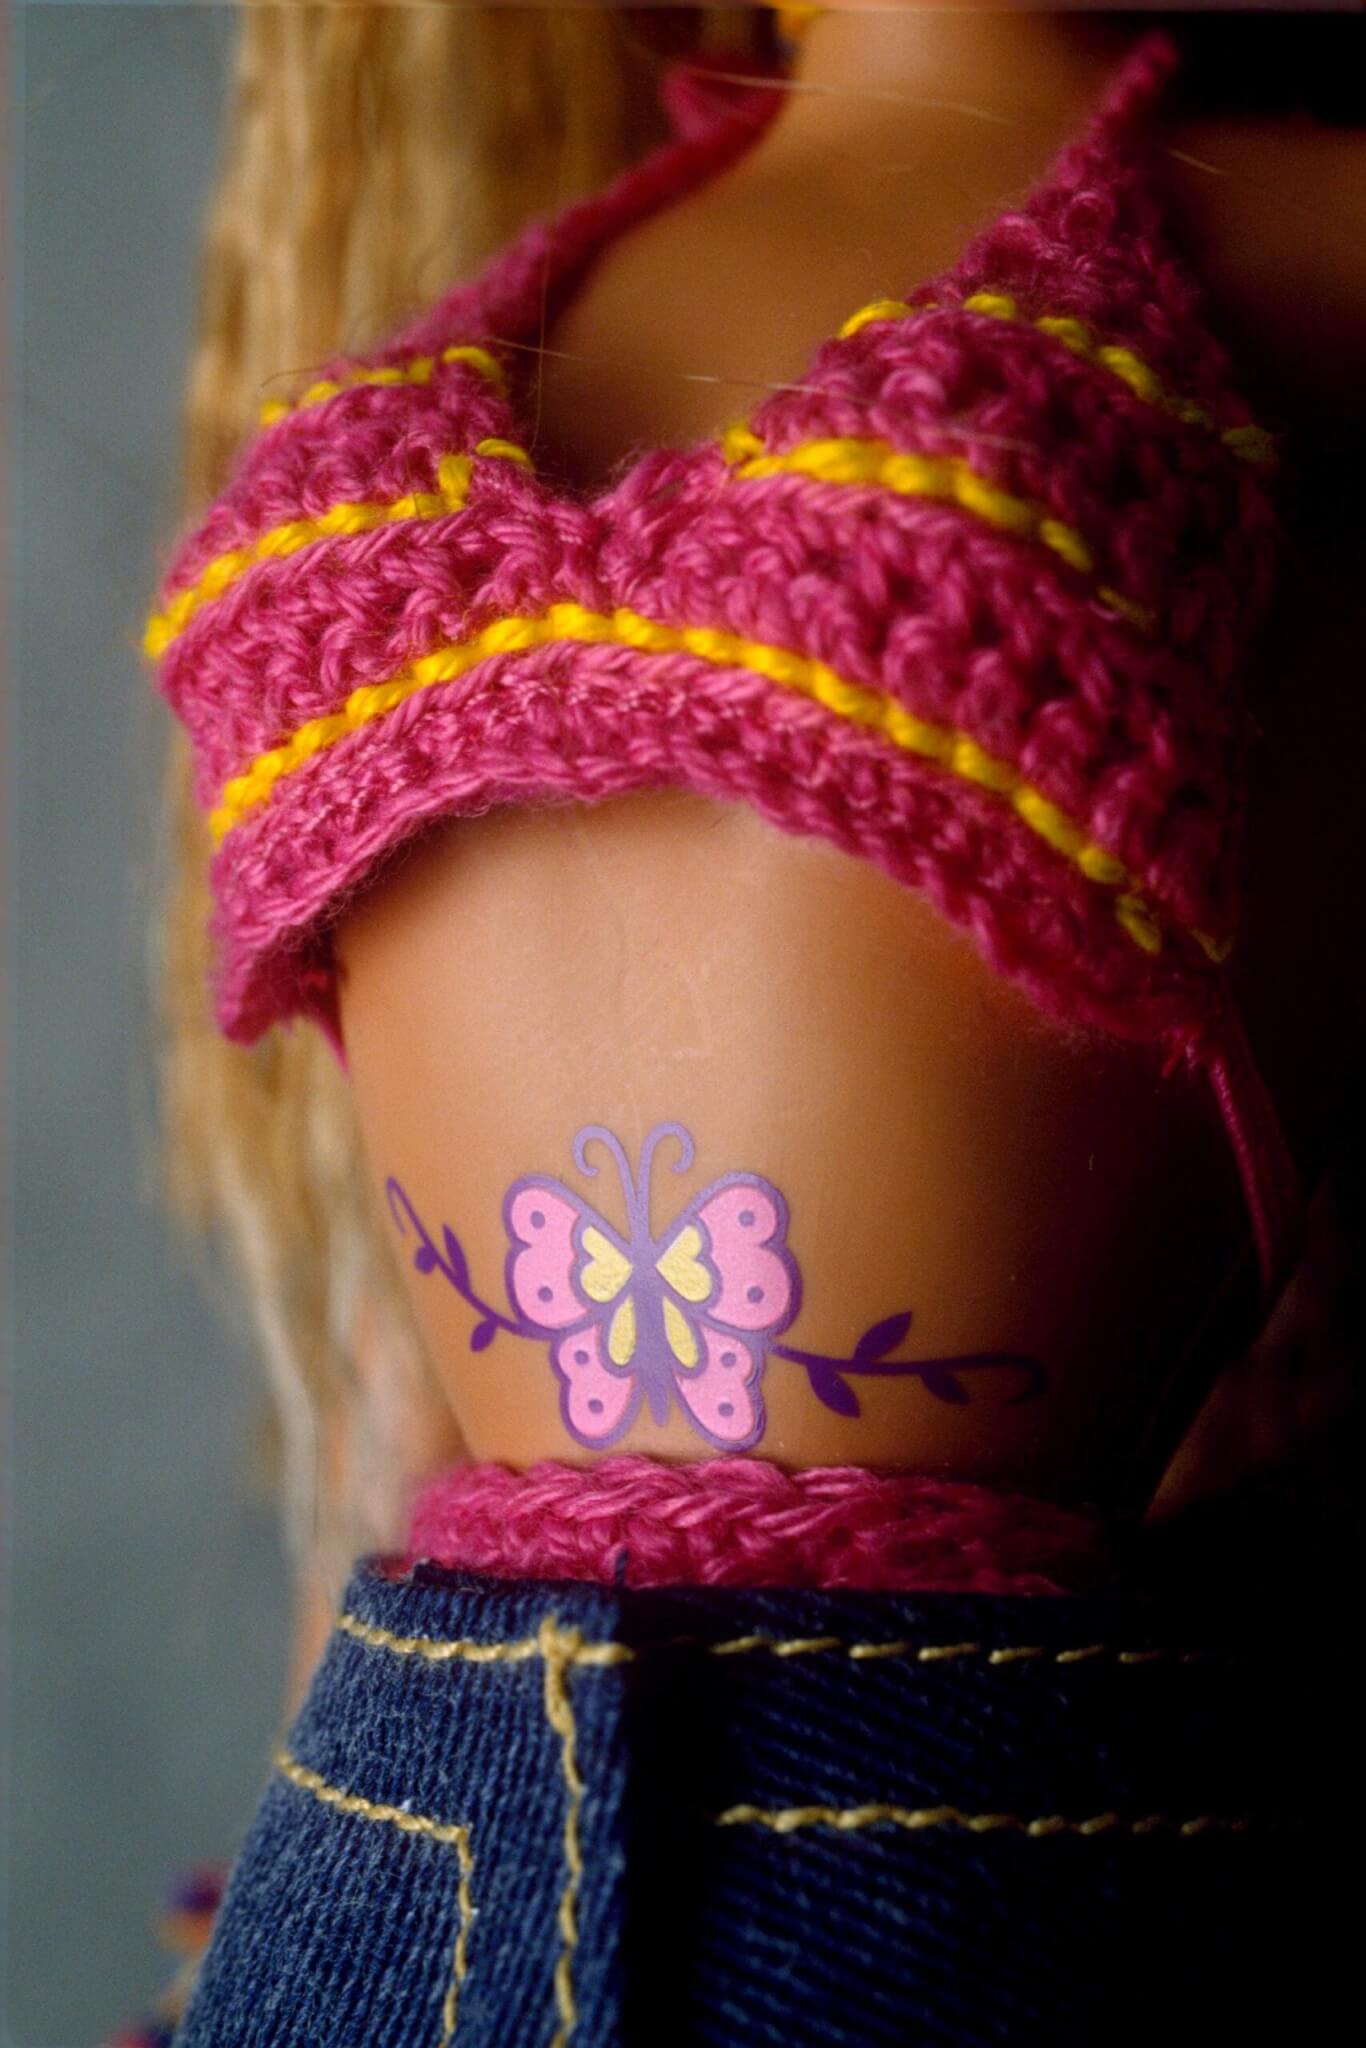 NEW BARBIE DOLL WITH BUTTERFLY TATTOO